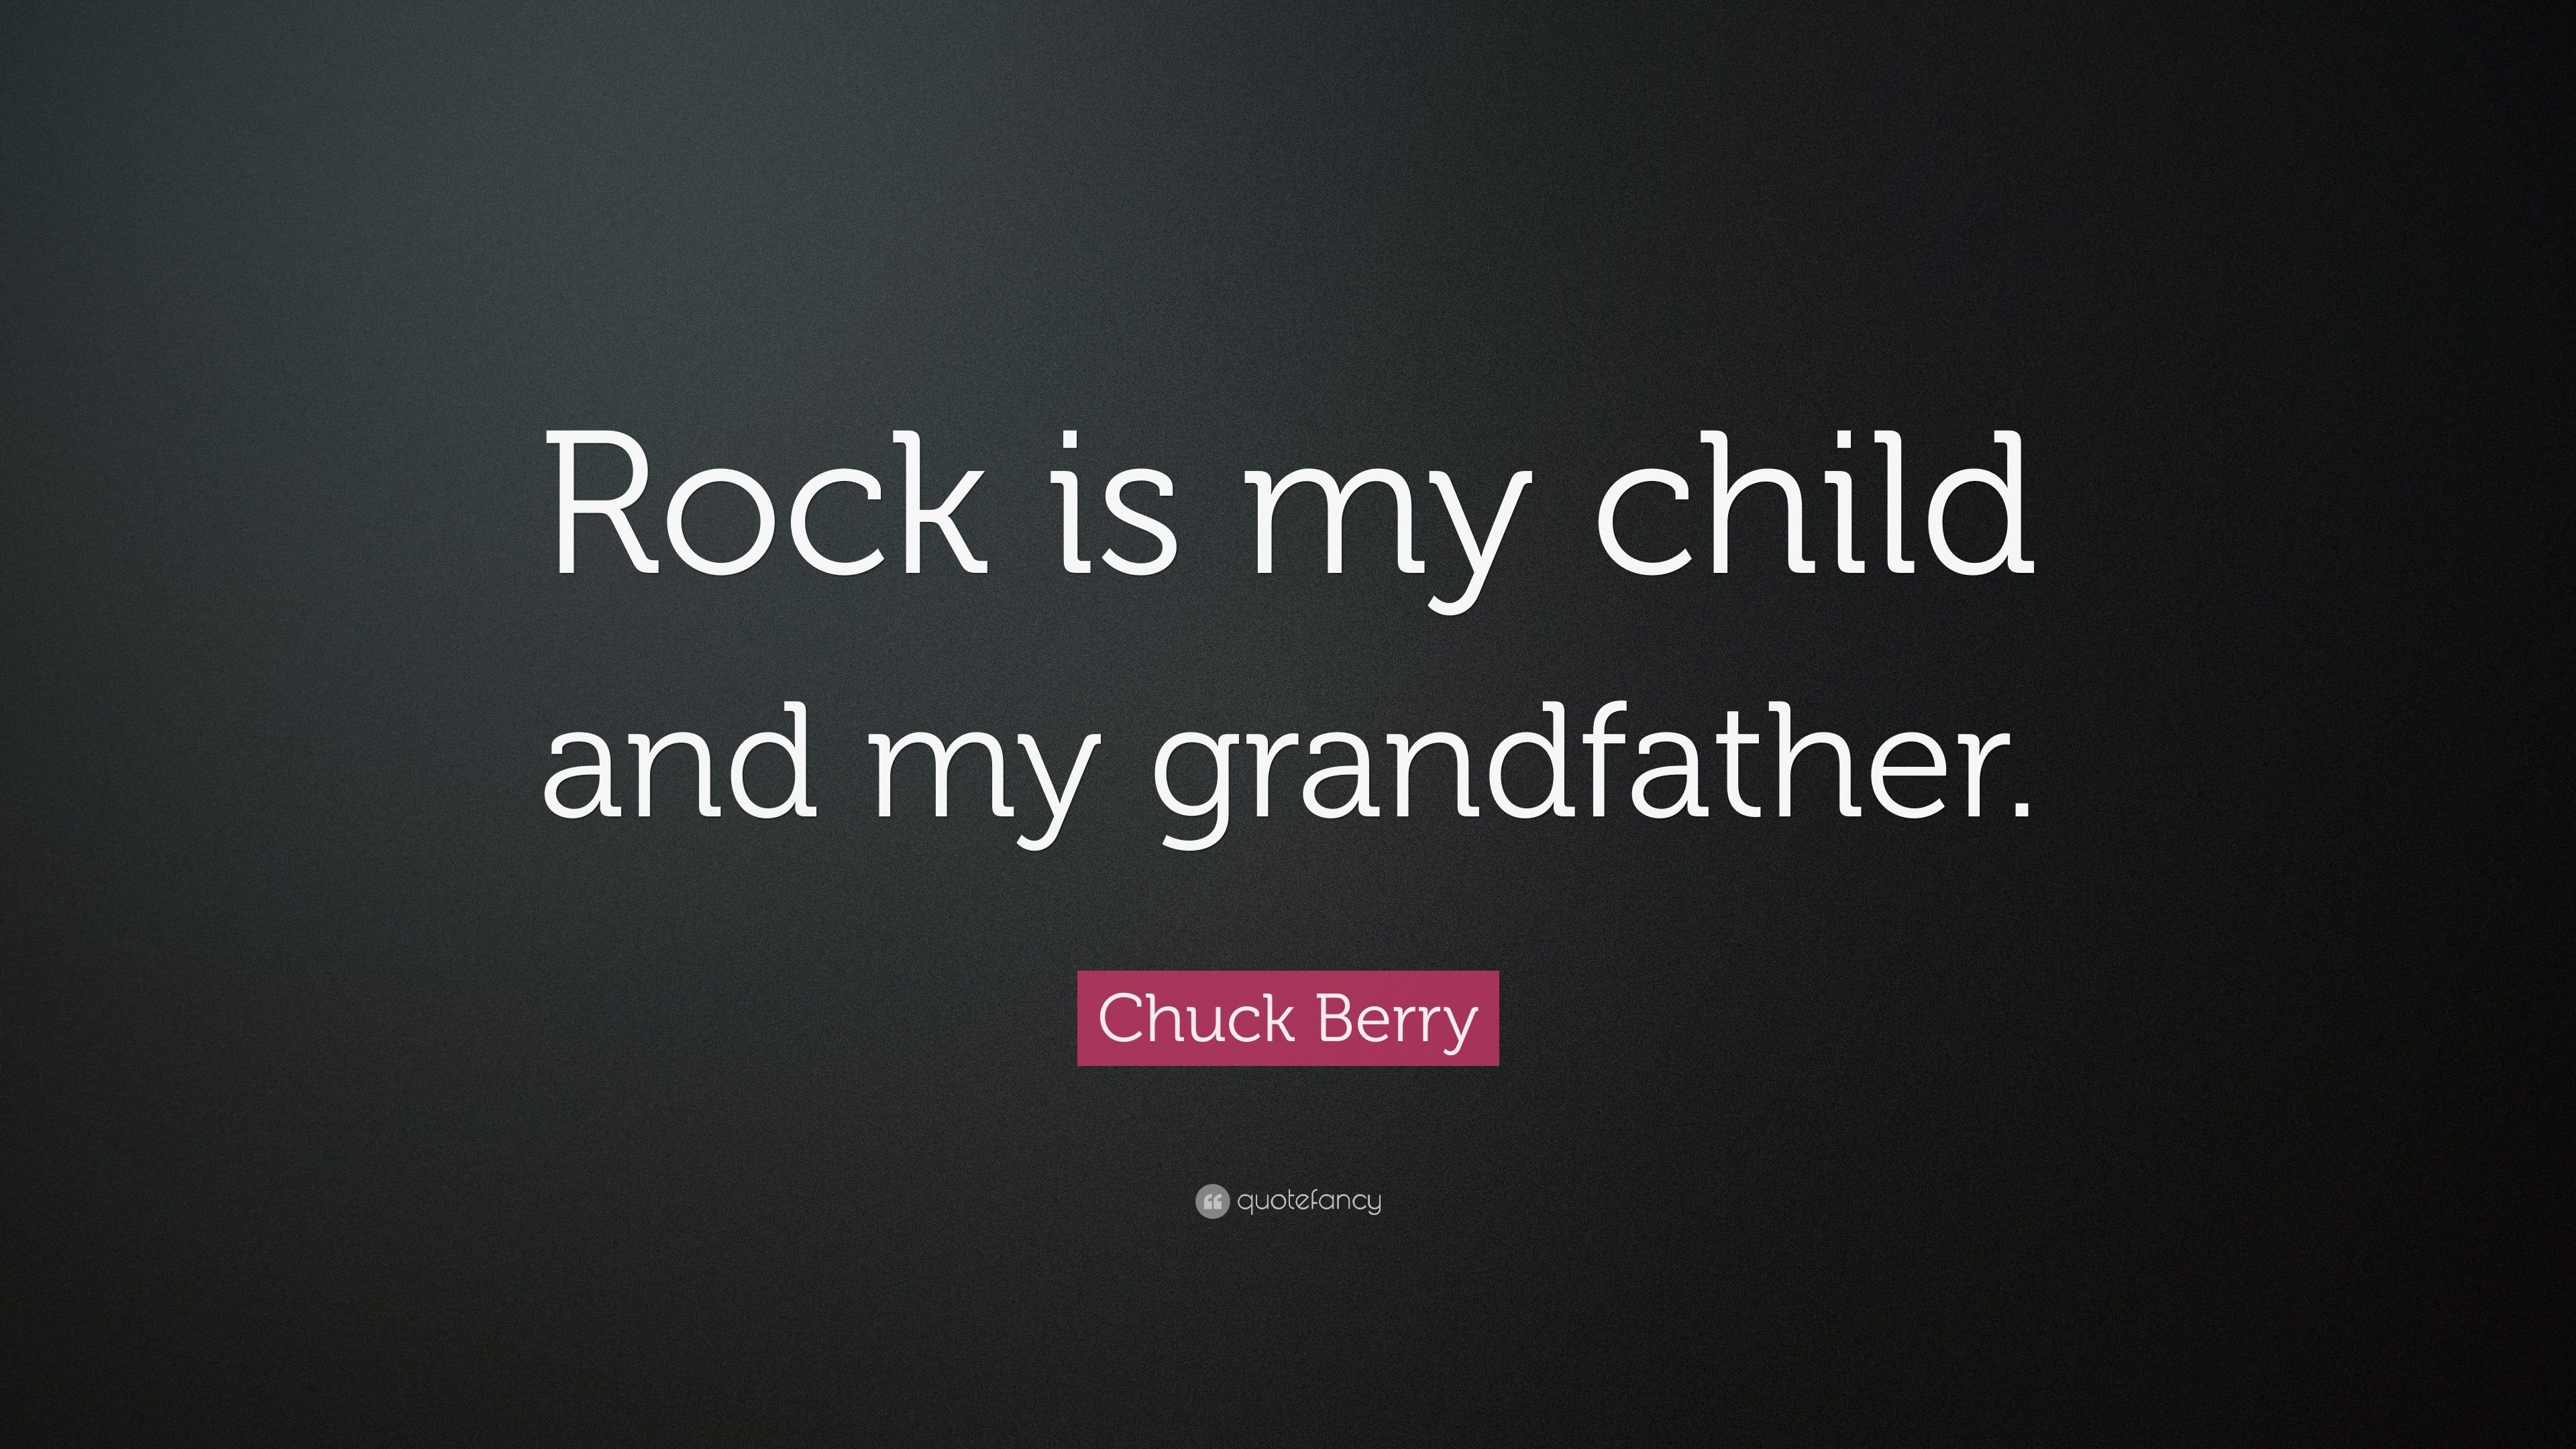 Chuck Berry Quote: “Rock is my child and my grandfather.” 7